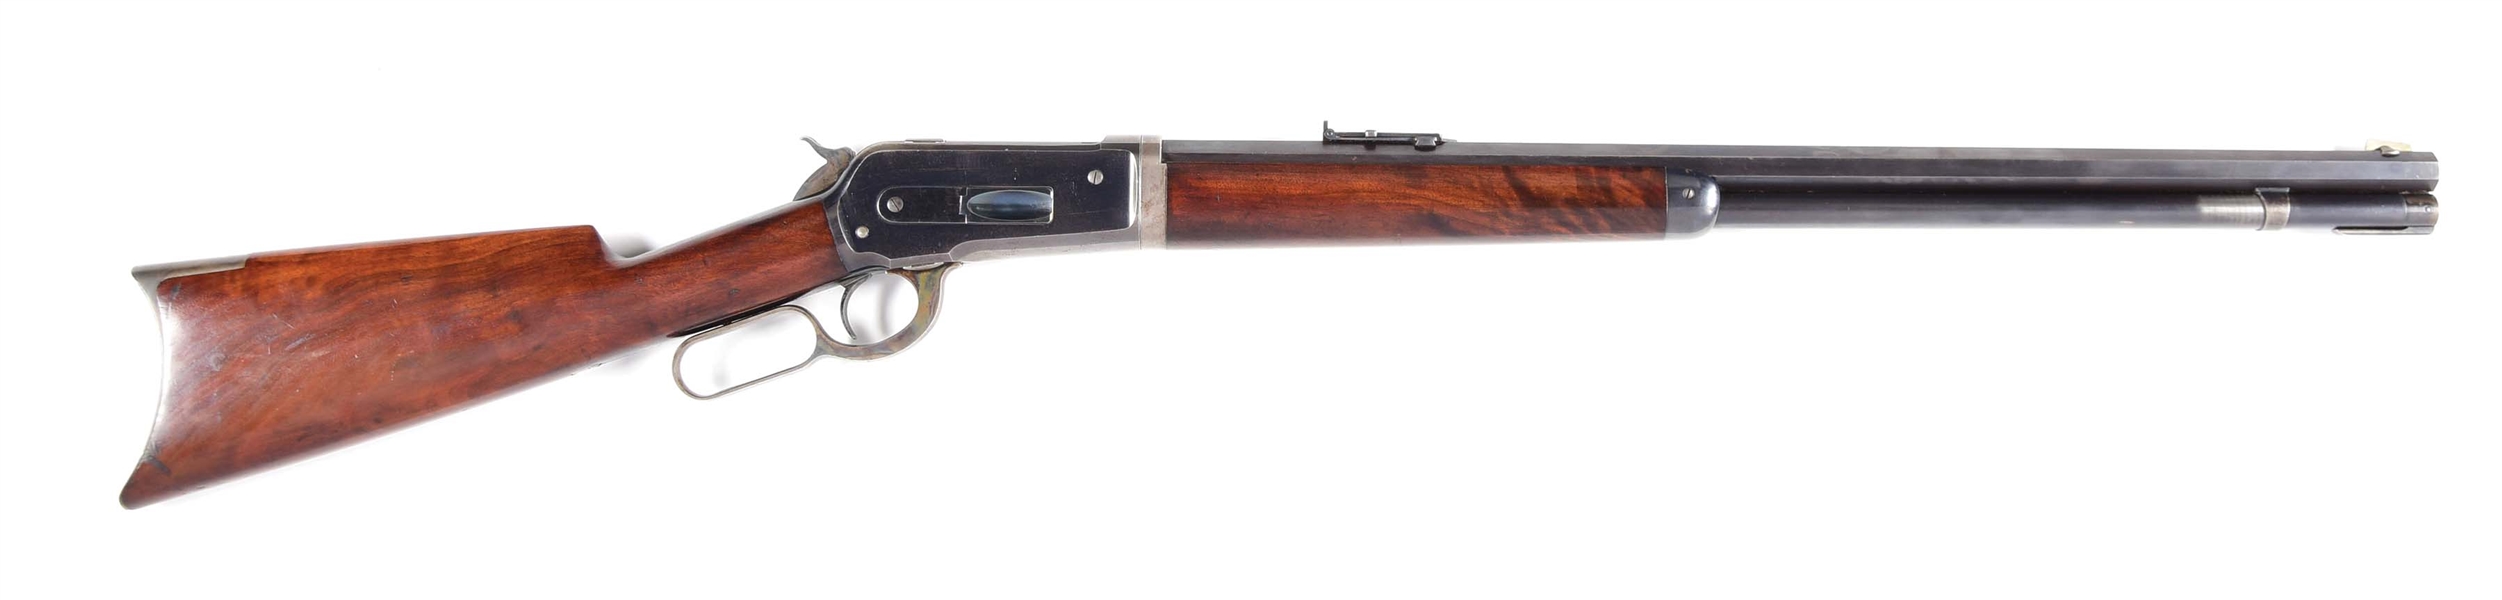 (A) ANTIQUE WINCHESTER MODEL 1886 TAKEDOWN RIFLE IN CALIBER .45-70 (1894).